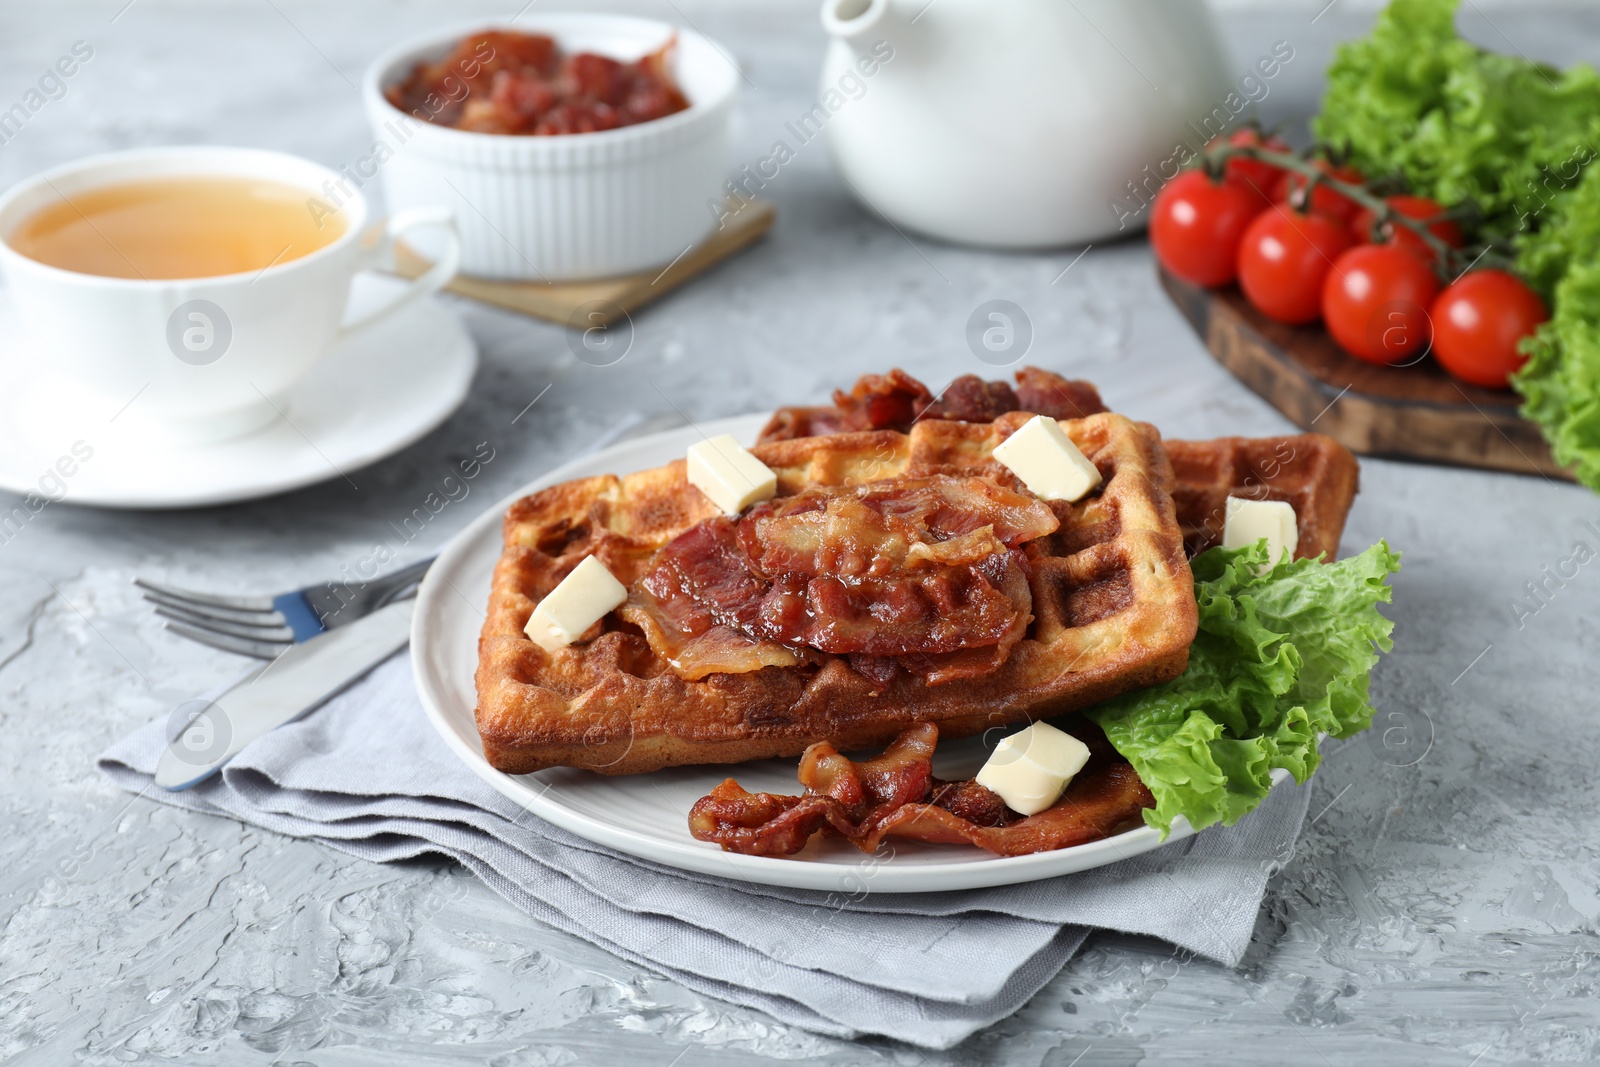 Photo of Delicious Belgium waffles served with fried bacon and butter on grey table